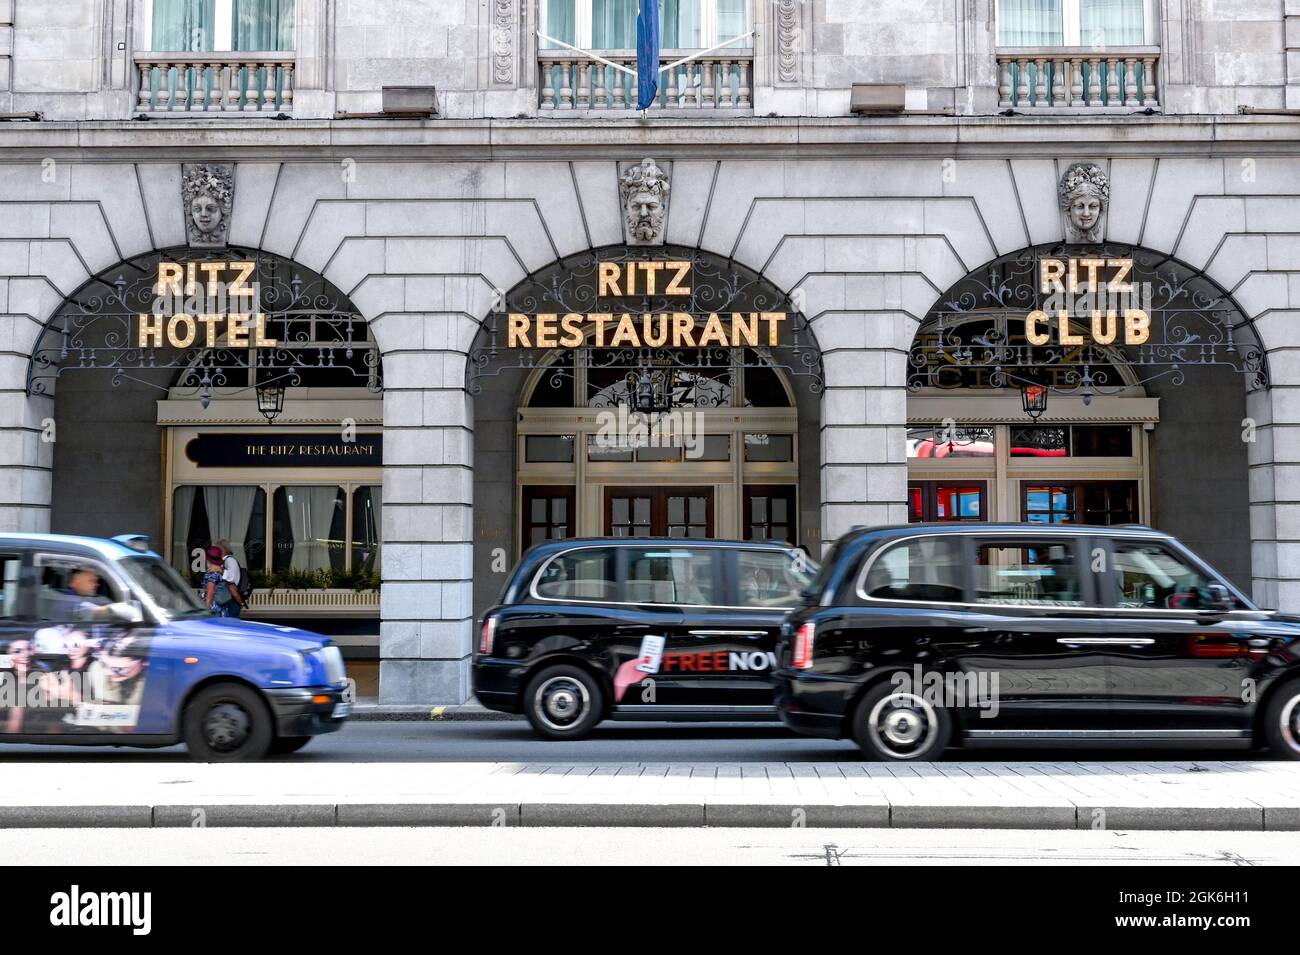 London, England - August 2021: Entrance to the Ritz Hotel and restaurant on central London Stock Photo